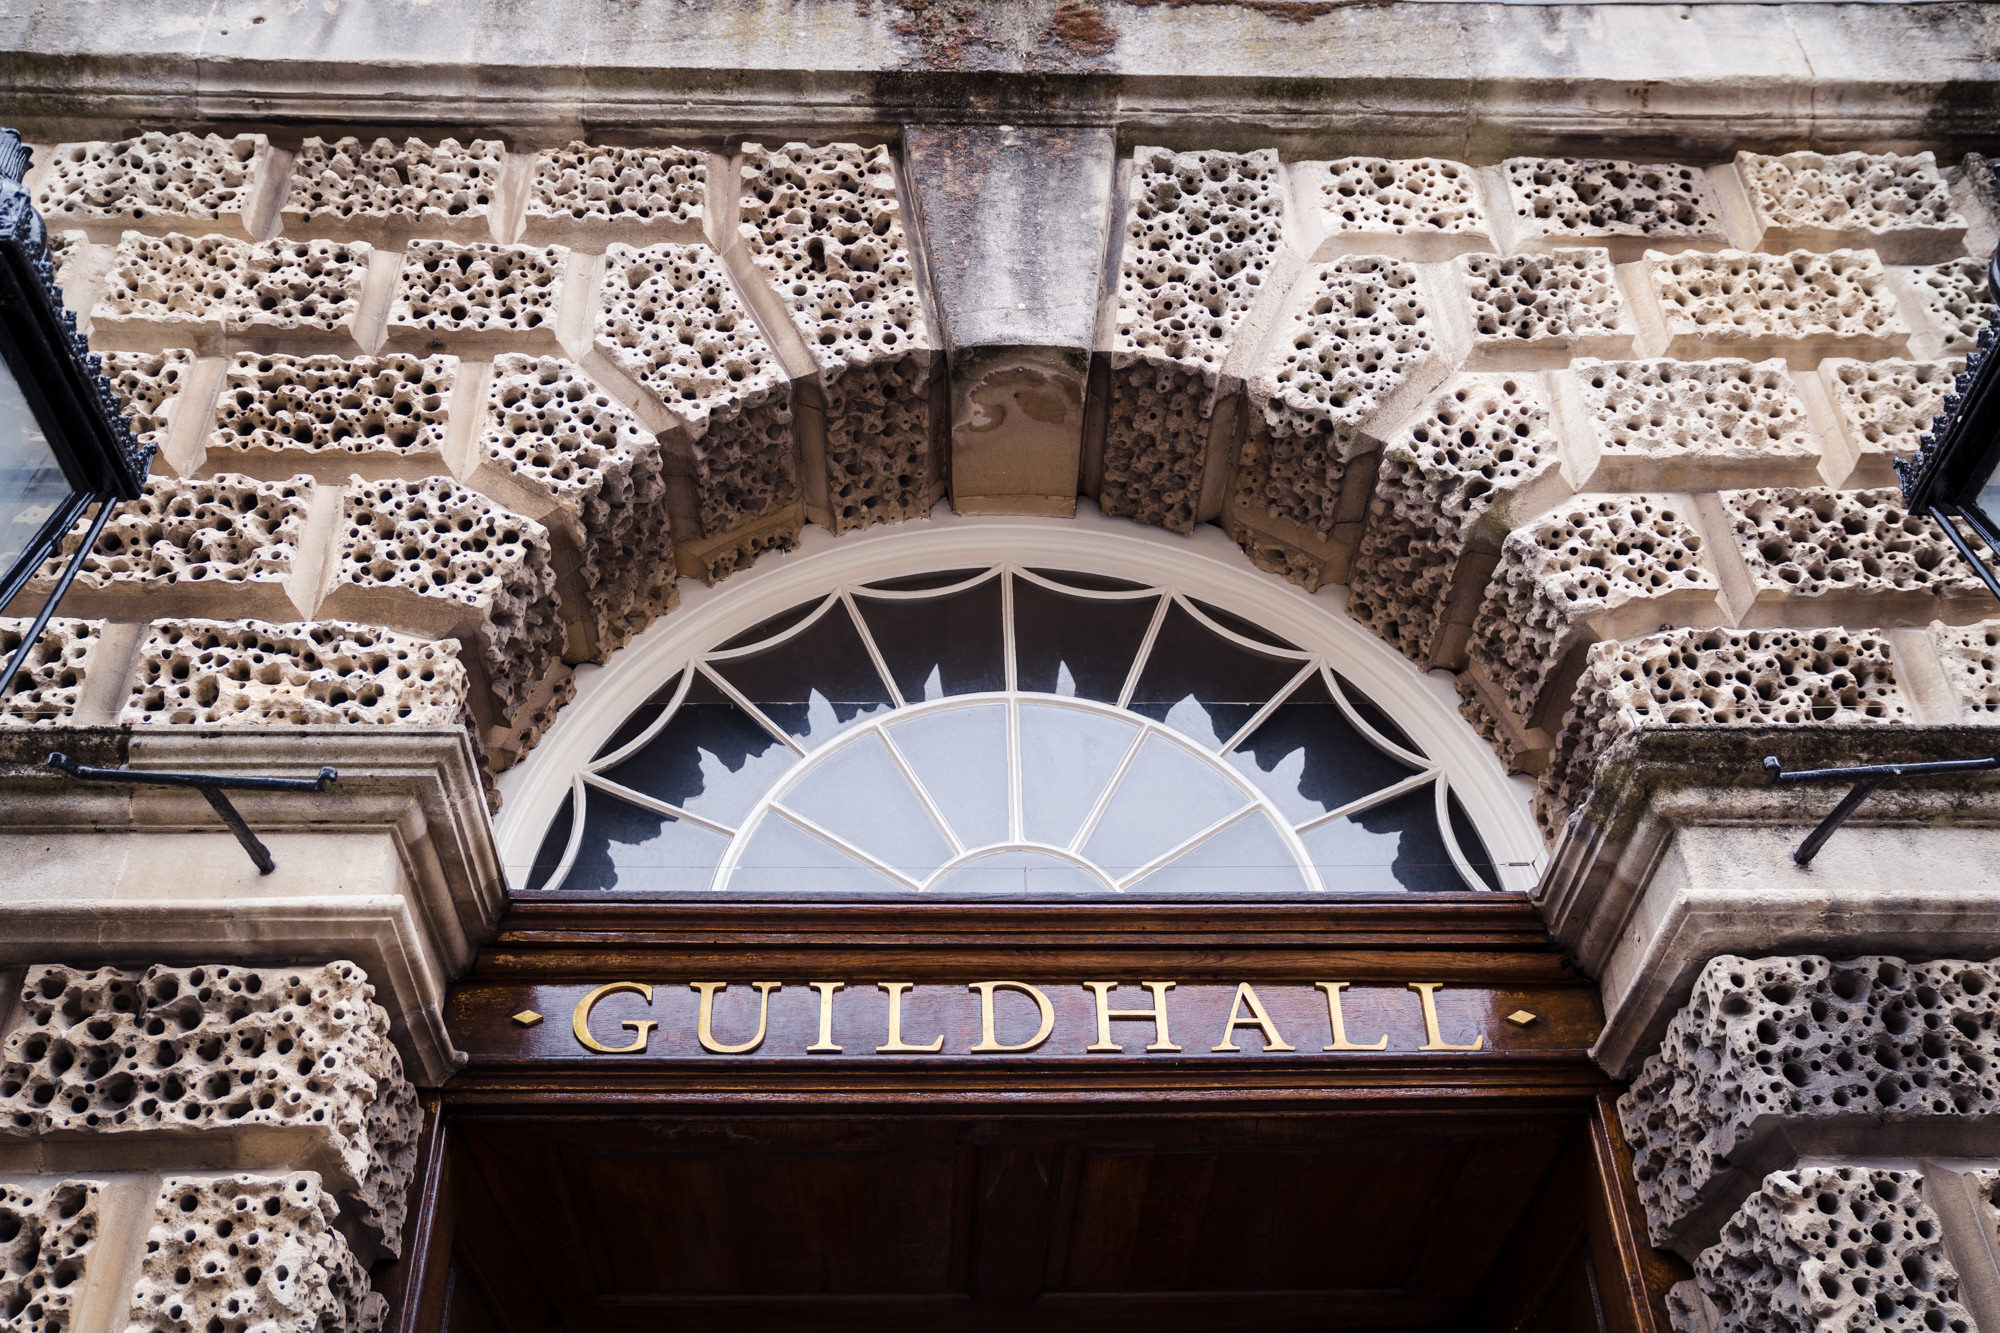 close up photo of Bath Guildhall sign